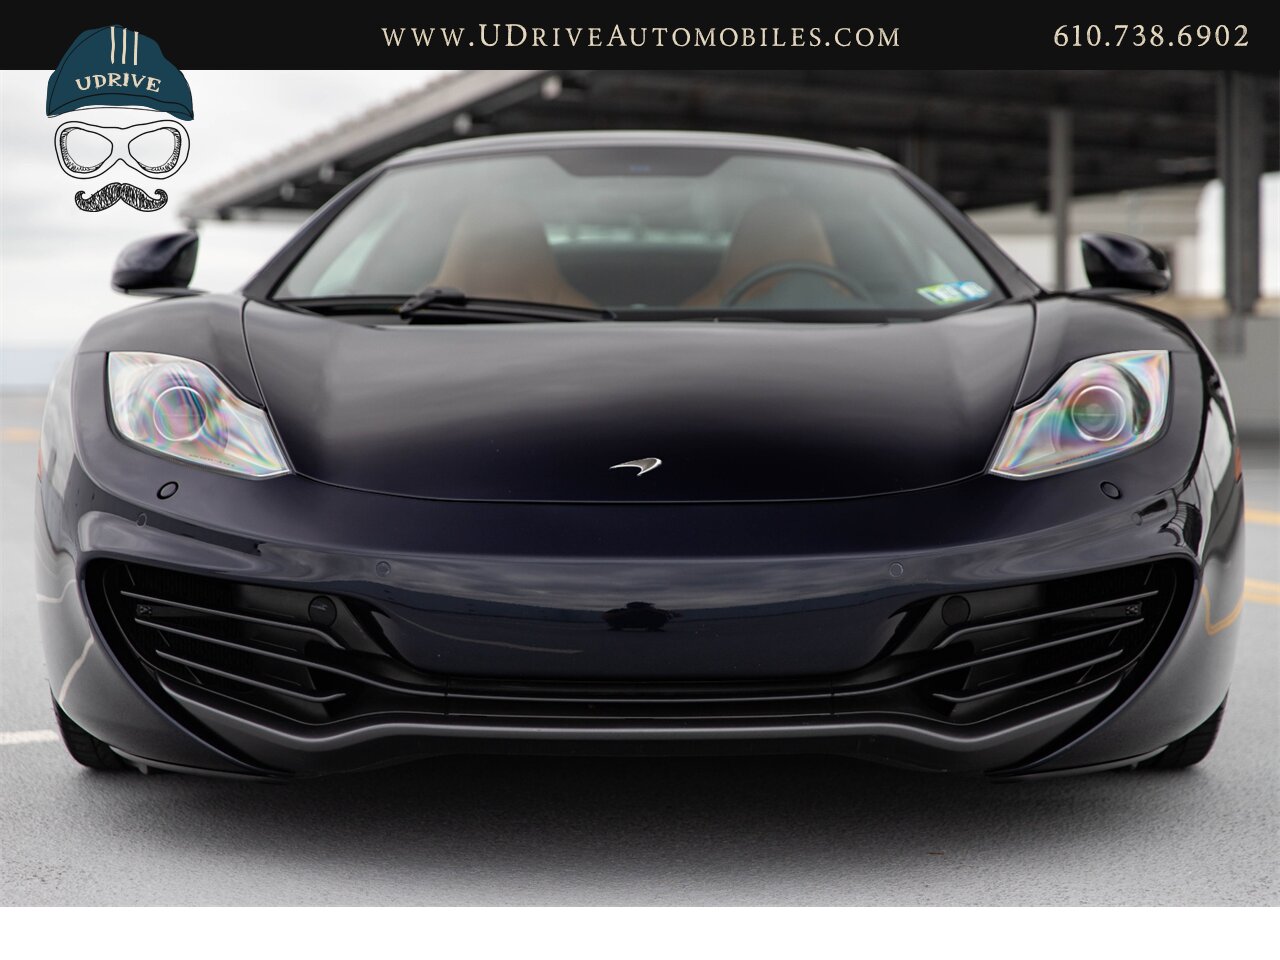 2013 McLaren MP4-12C Spider 1 Owner 6k Miles Carbon Fiber Full Leather  Sapphire Black over Natural Tan Leather - Photo 12 - West Chester, PA 19382